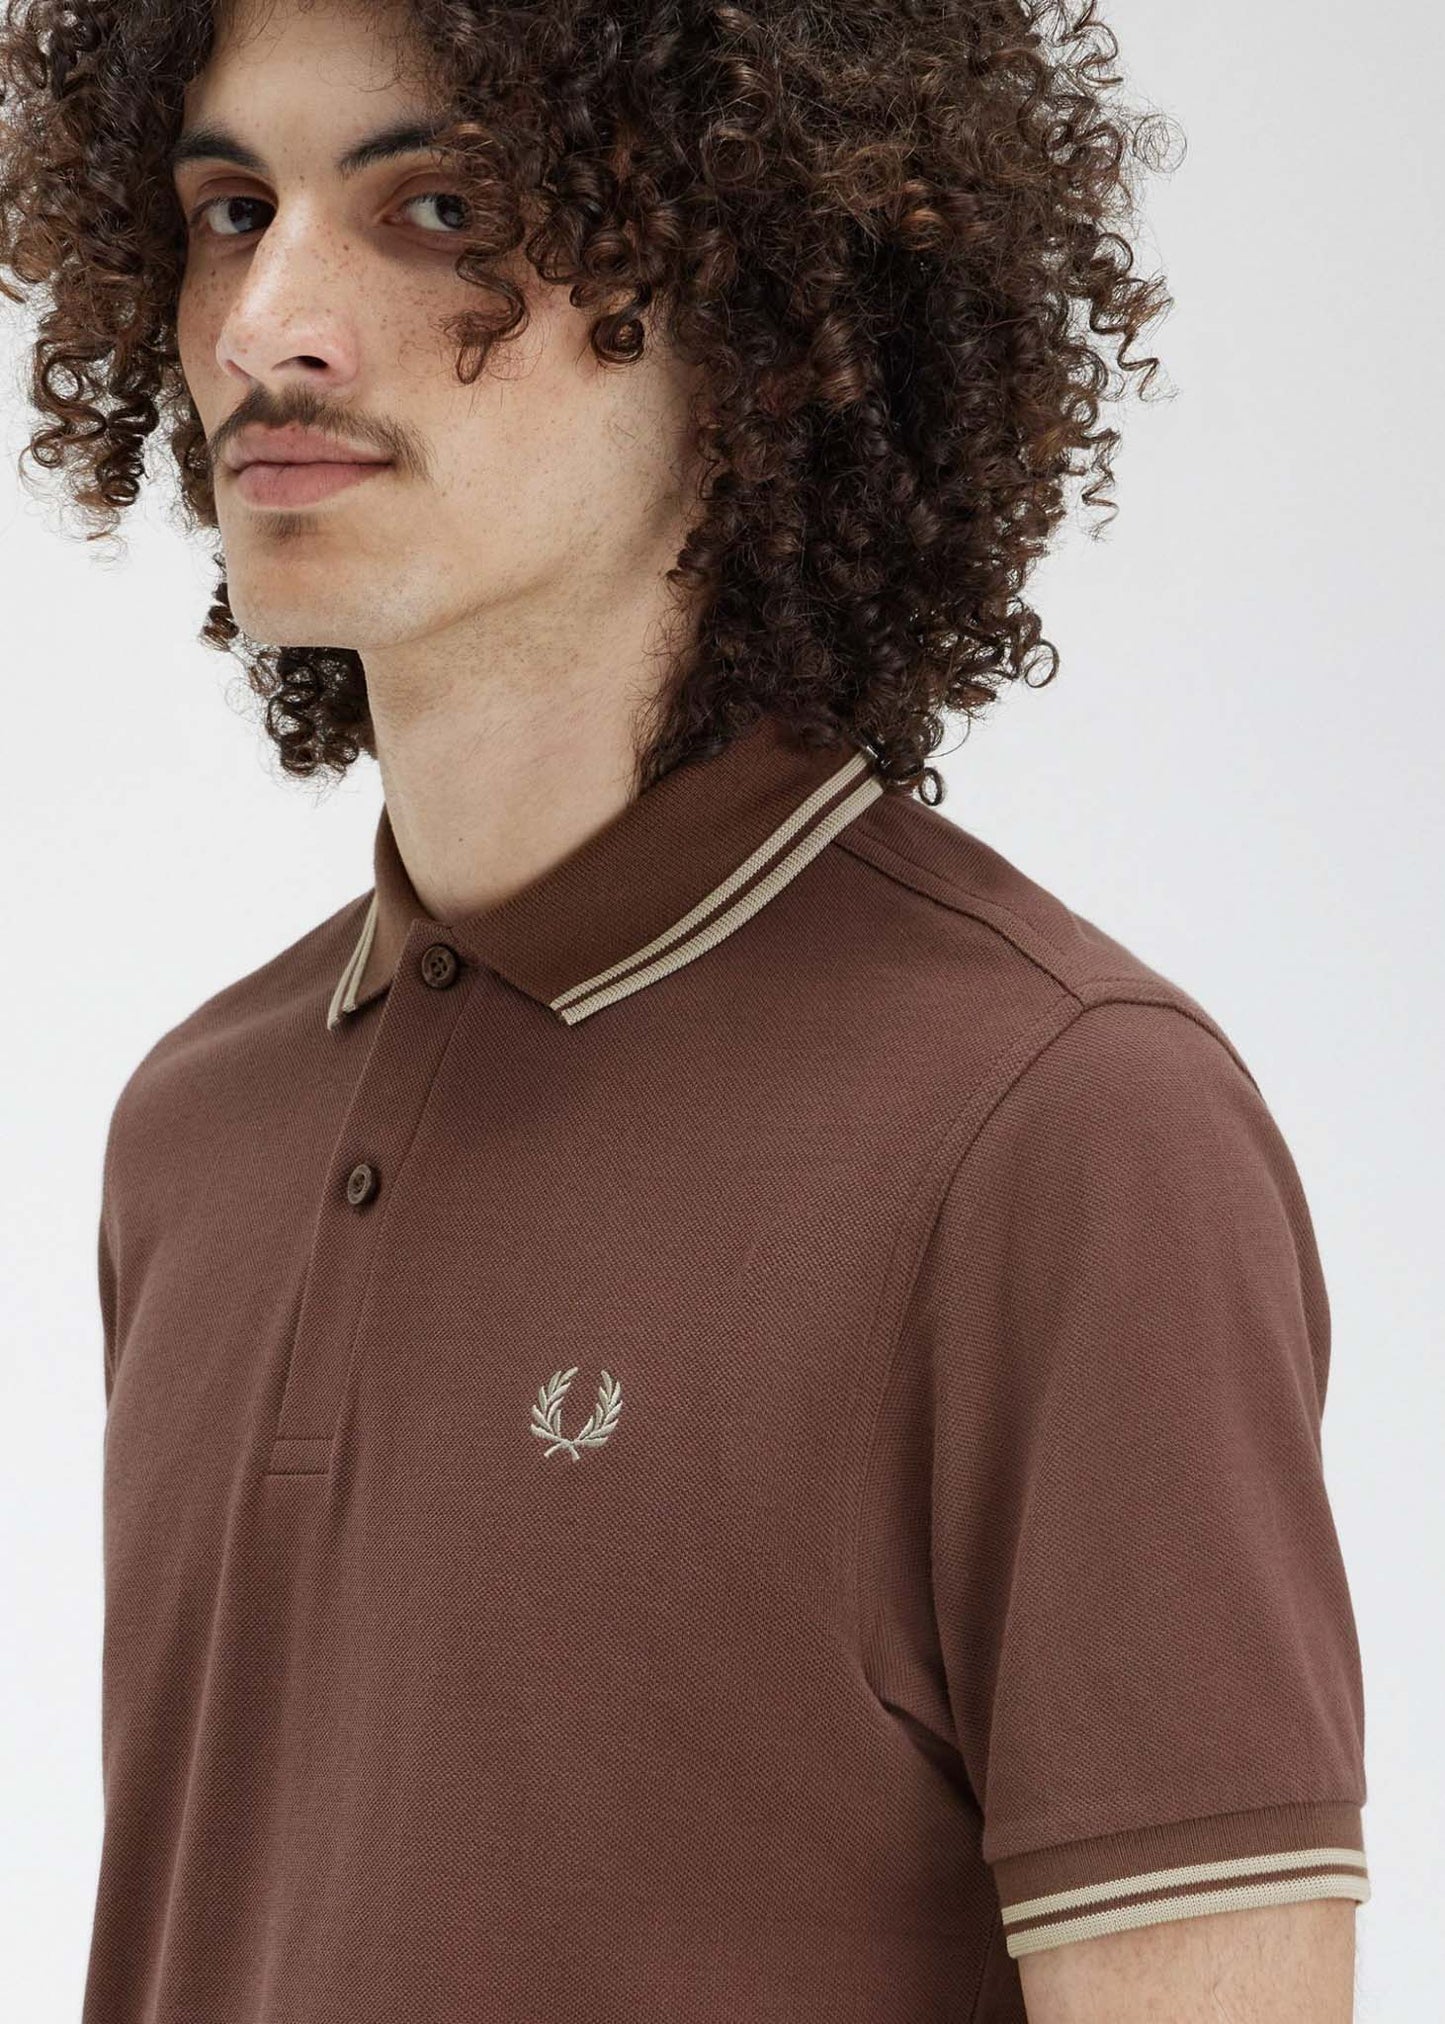 Fred Perry Polo's  Twin tipped fred perry shirt - brick warm grey 